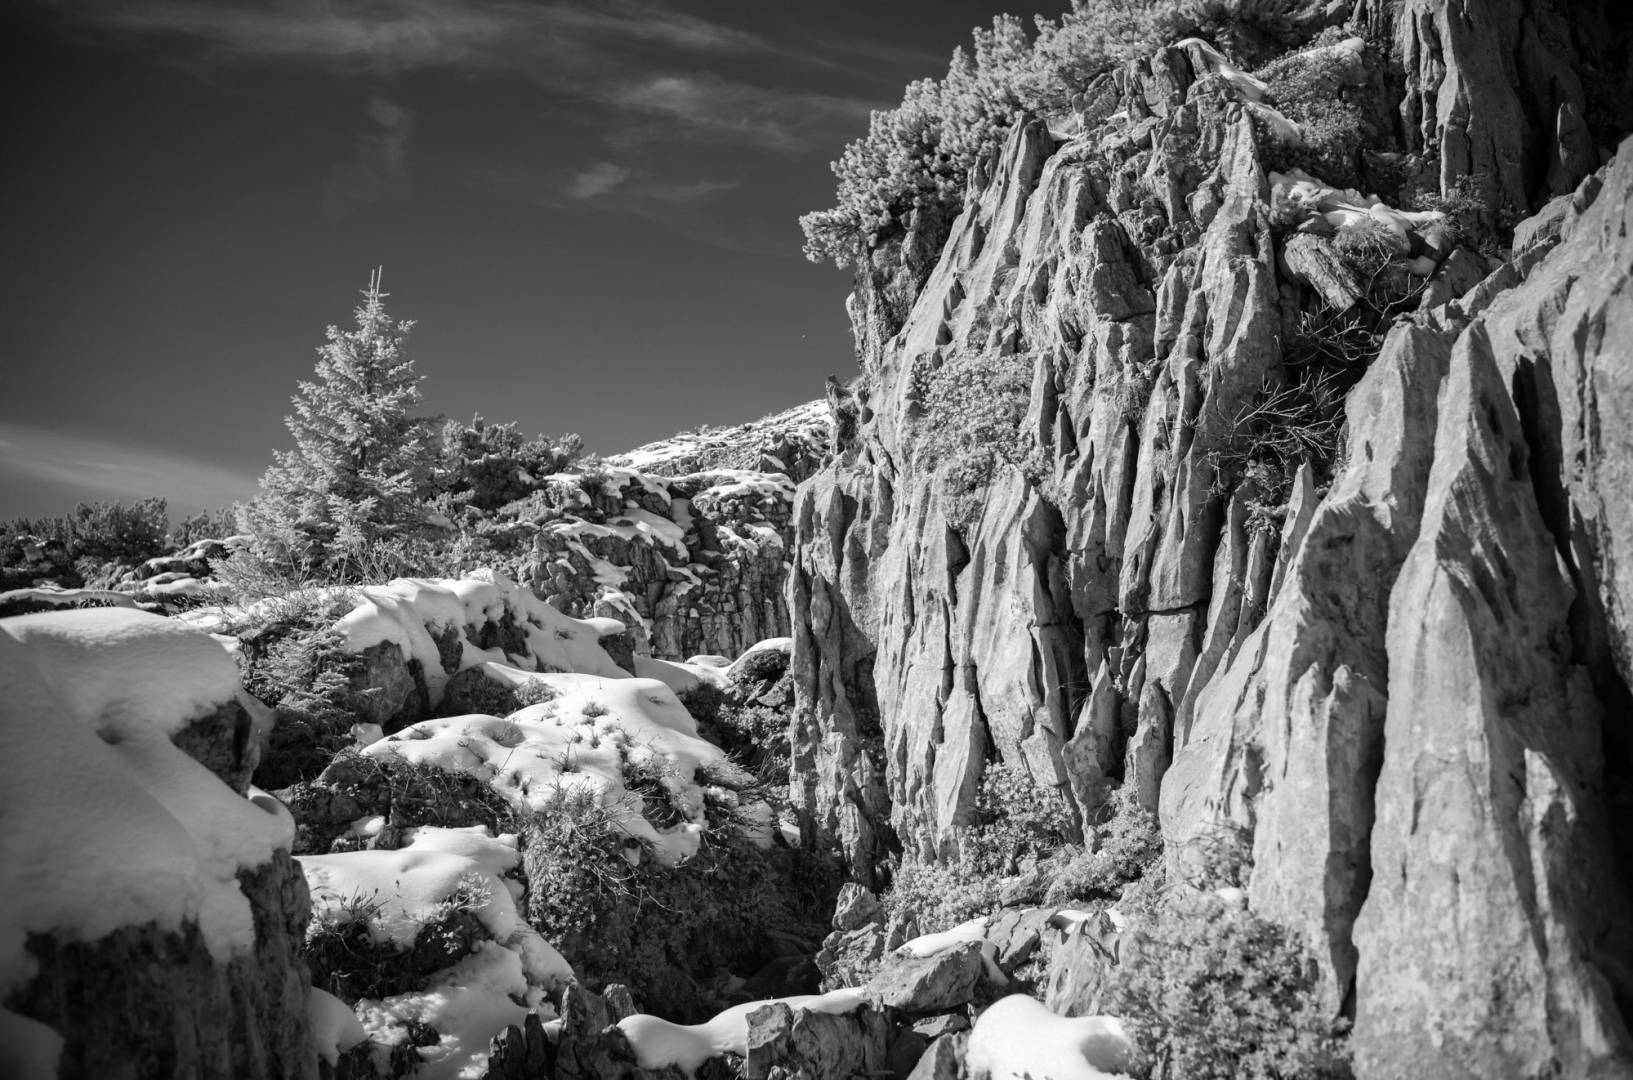 Gottesackerplateau, Kleinwalsertal. Leica M10-M with 35mm Summilux 1/125s f/2.8 ISO 3200 Infrared Filter 715